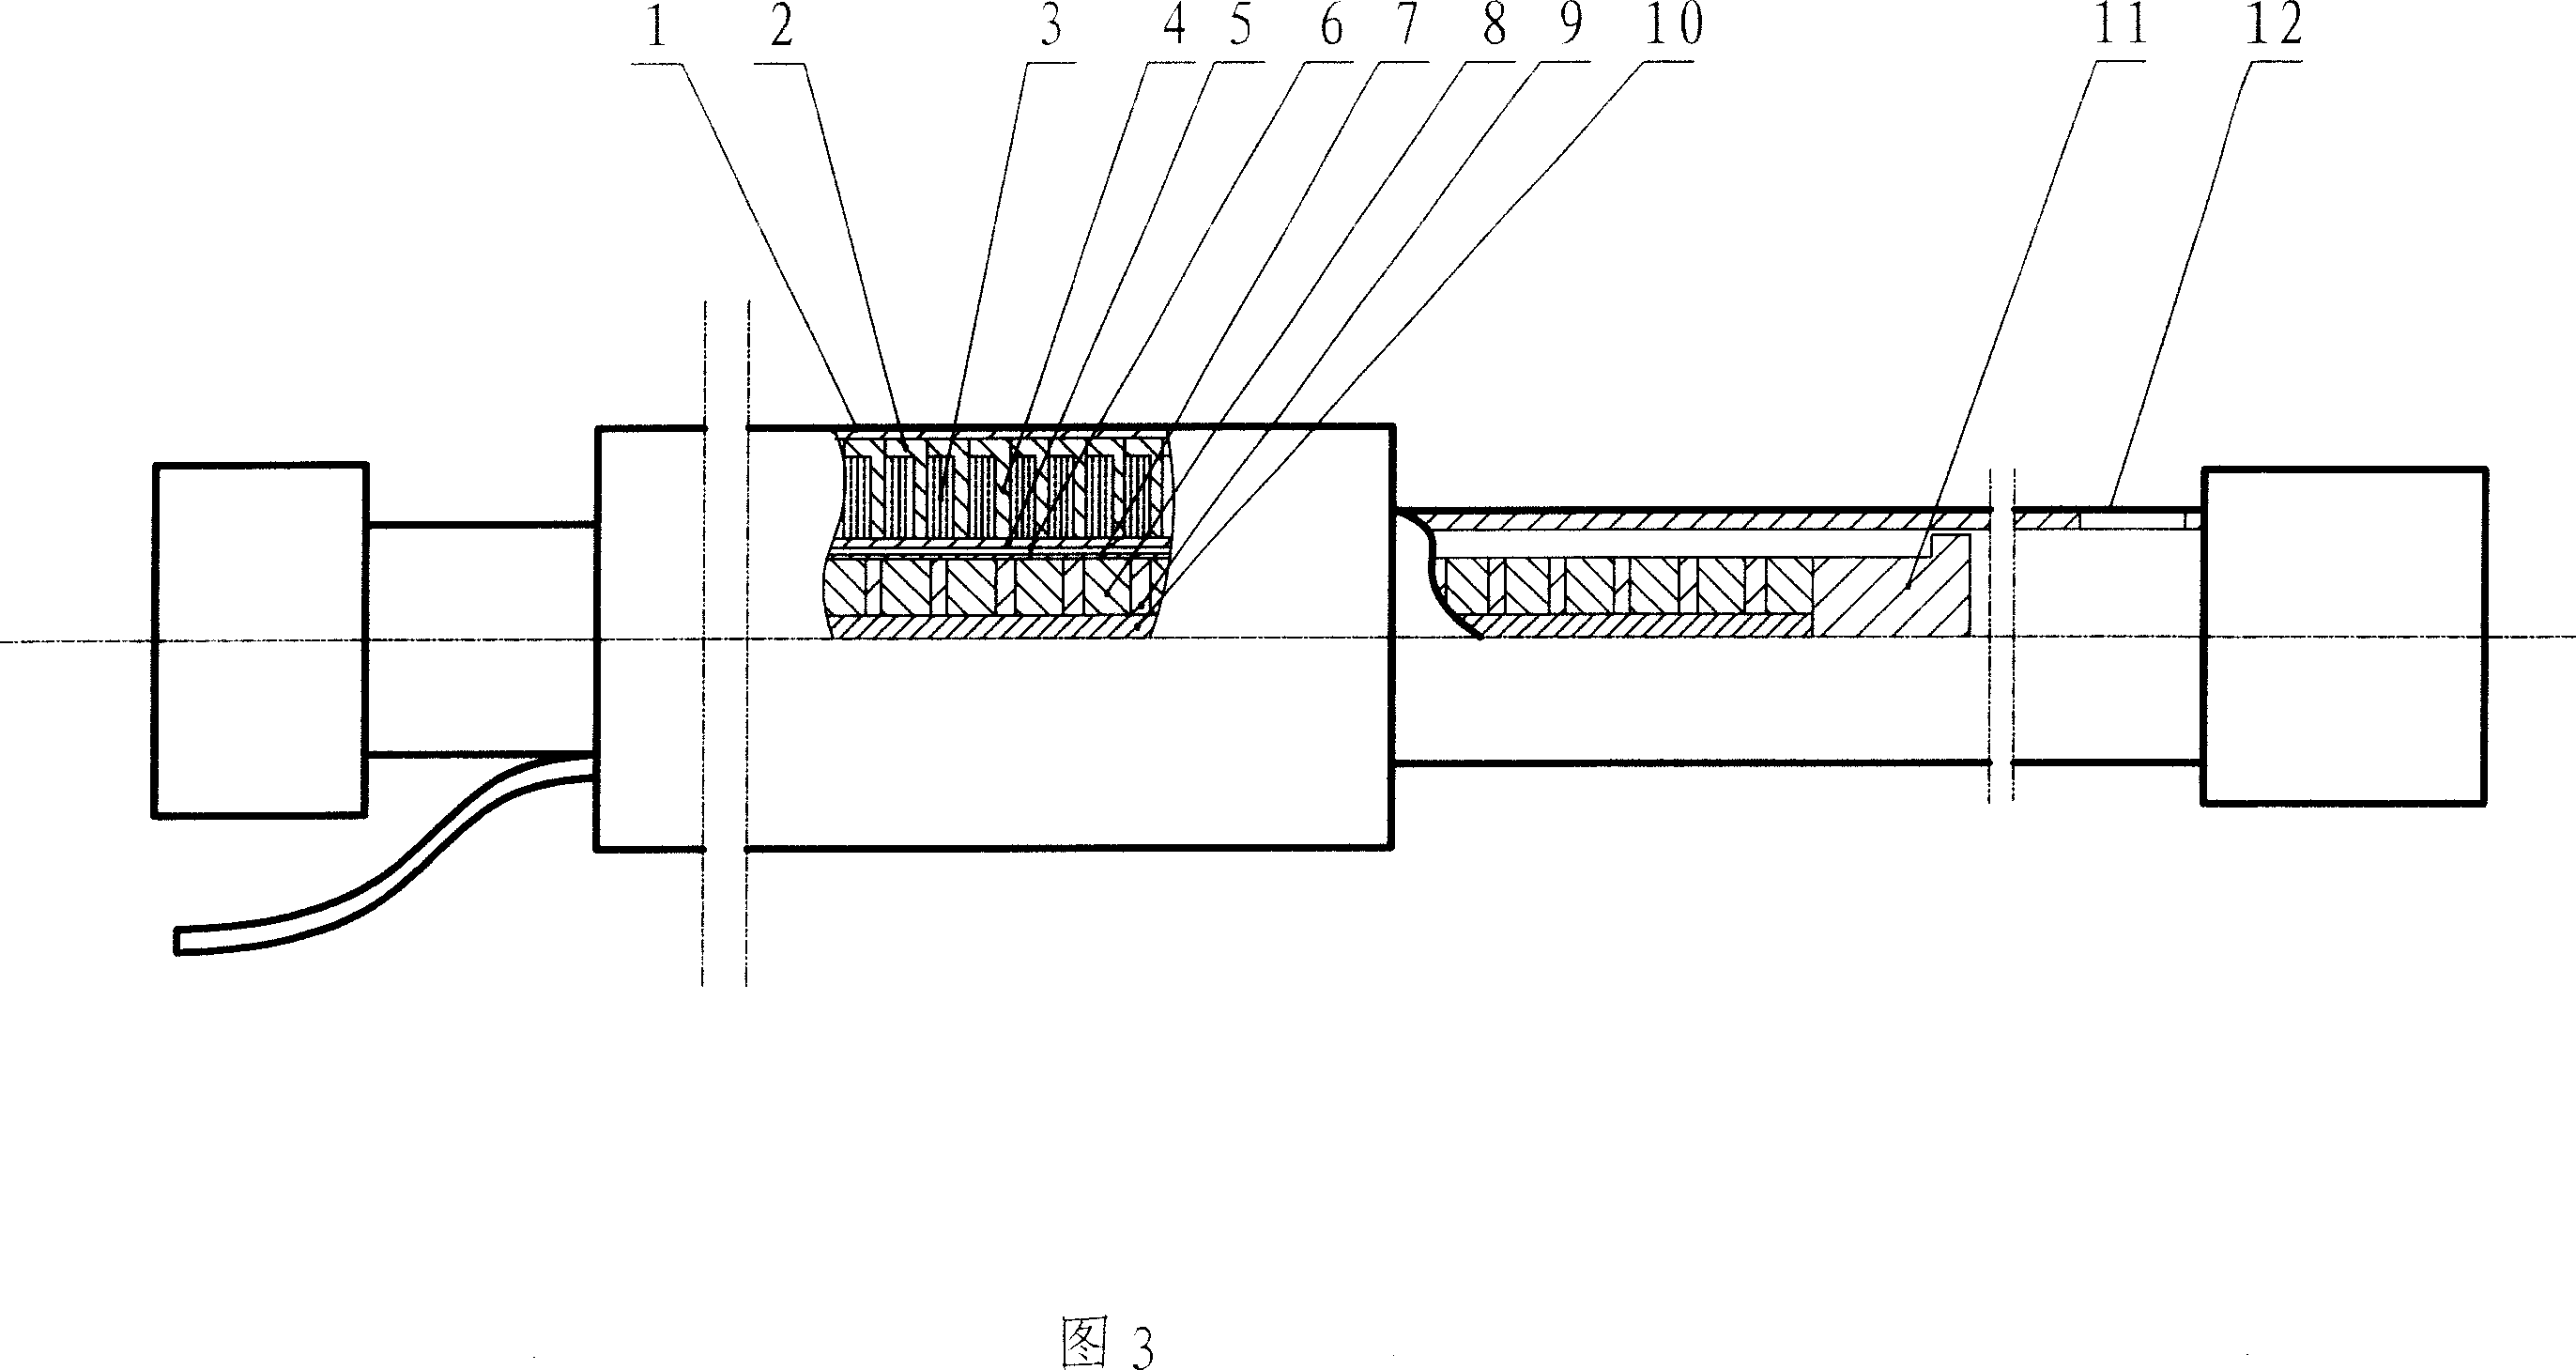 Lifting device of electric submersible piston pump in horizontal wells